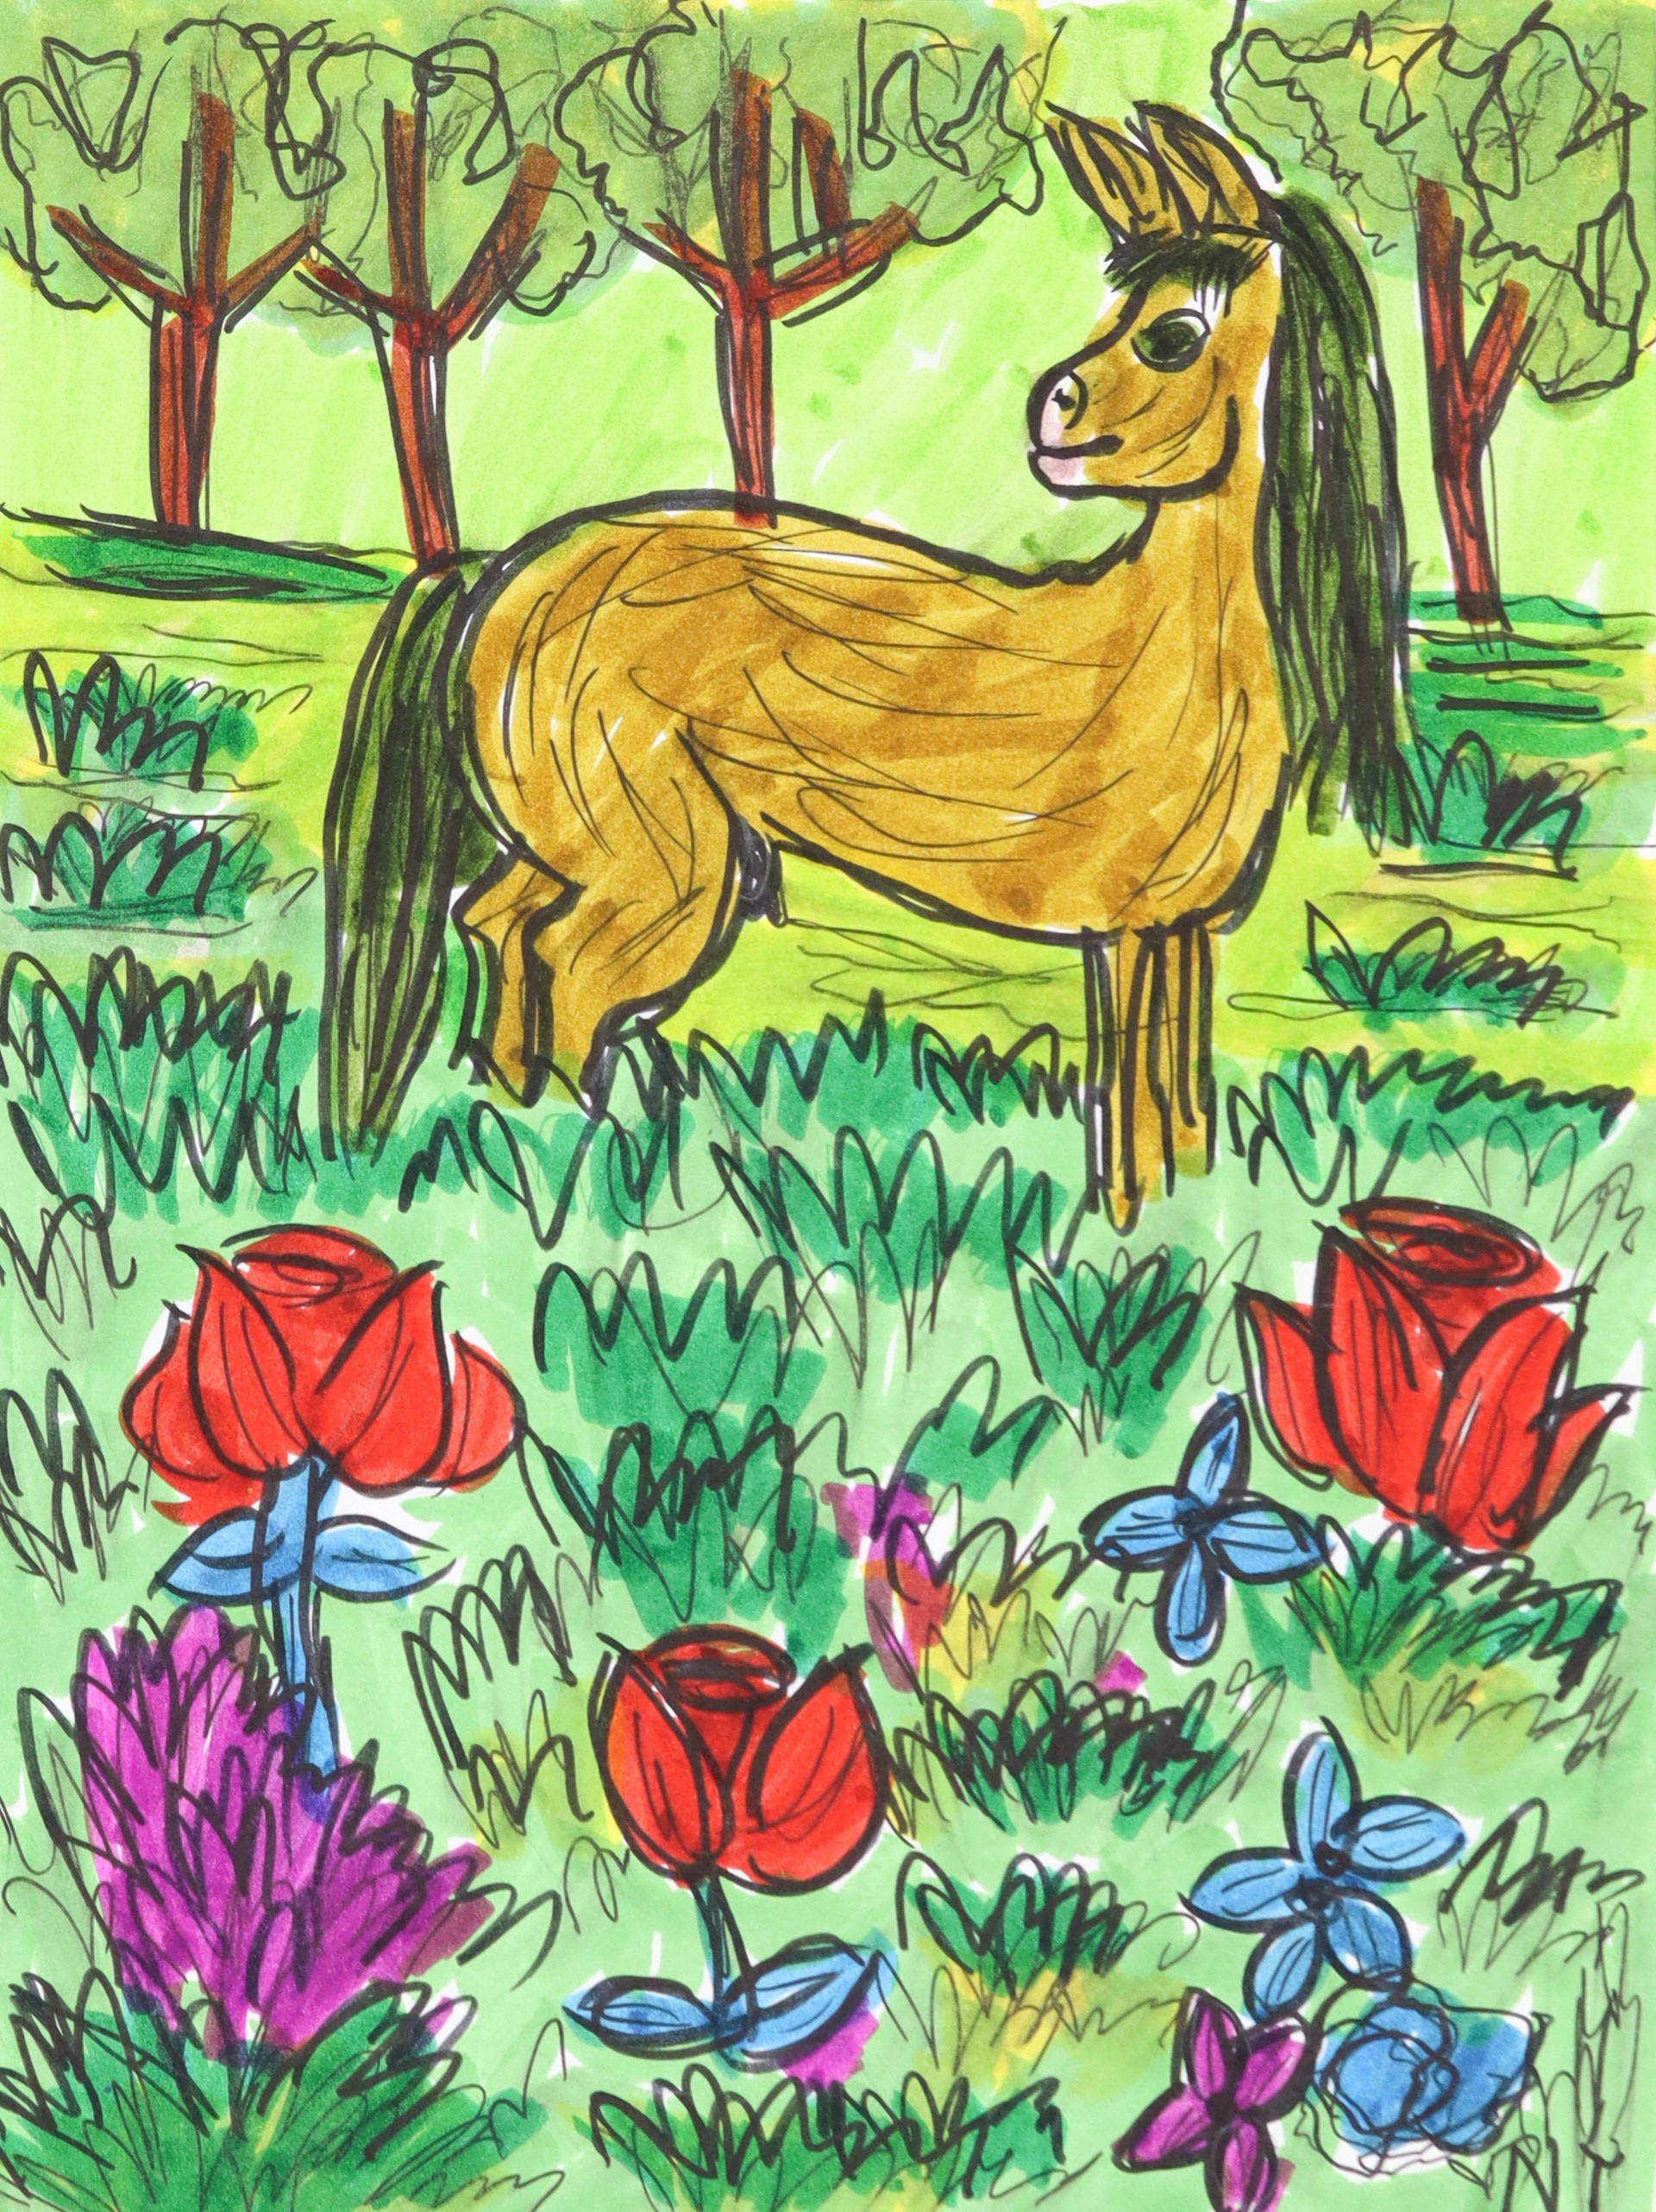 Horse in the Field by Nonja Tiller